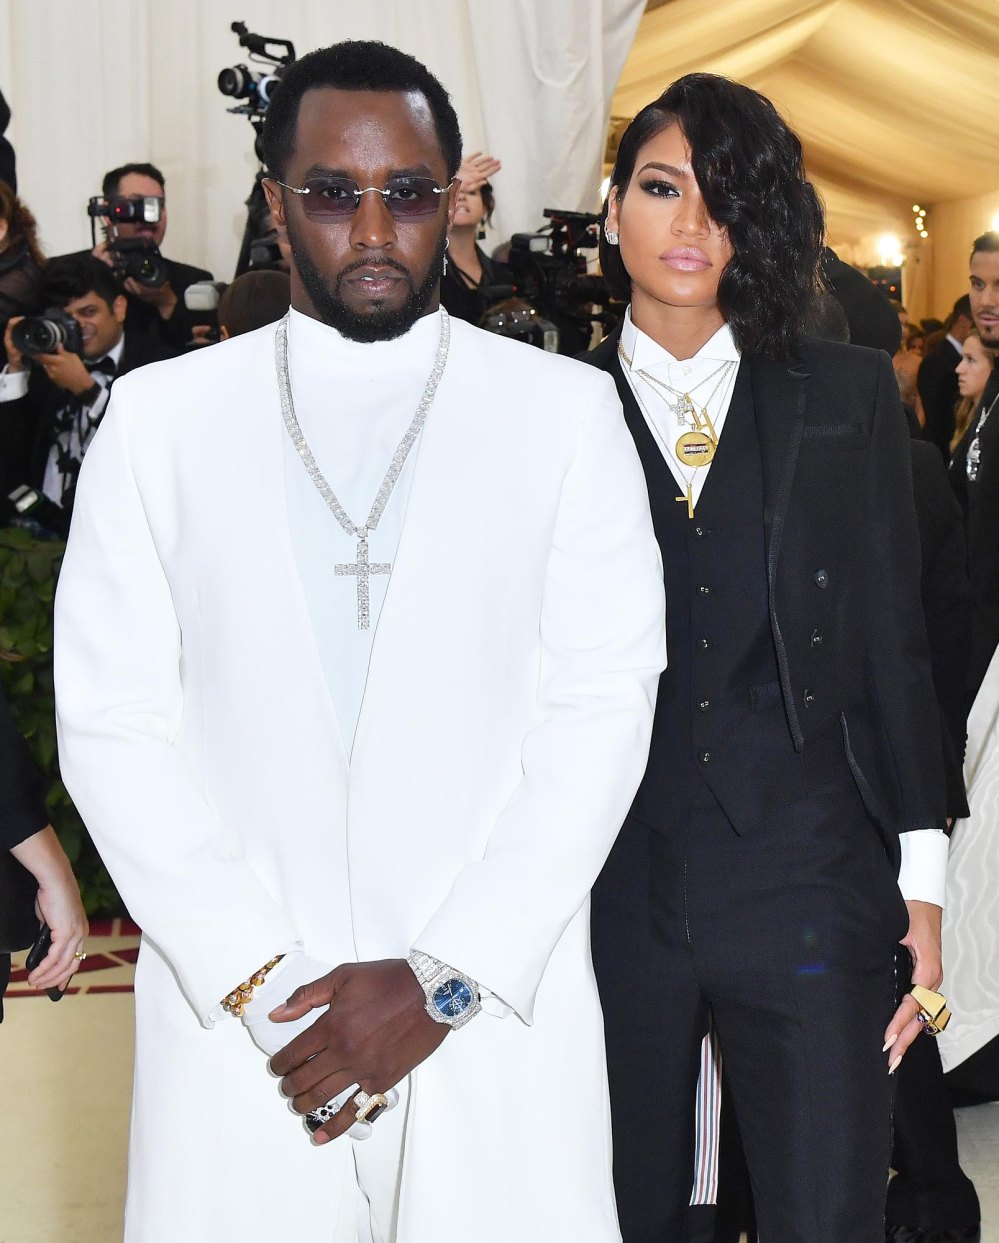 Diddy Seen Physically Assaulting Ex Cassie in Resurfaced 2016 Security Video Footage